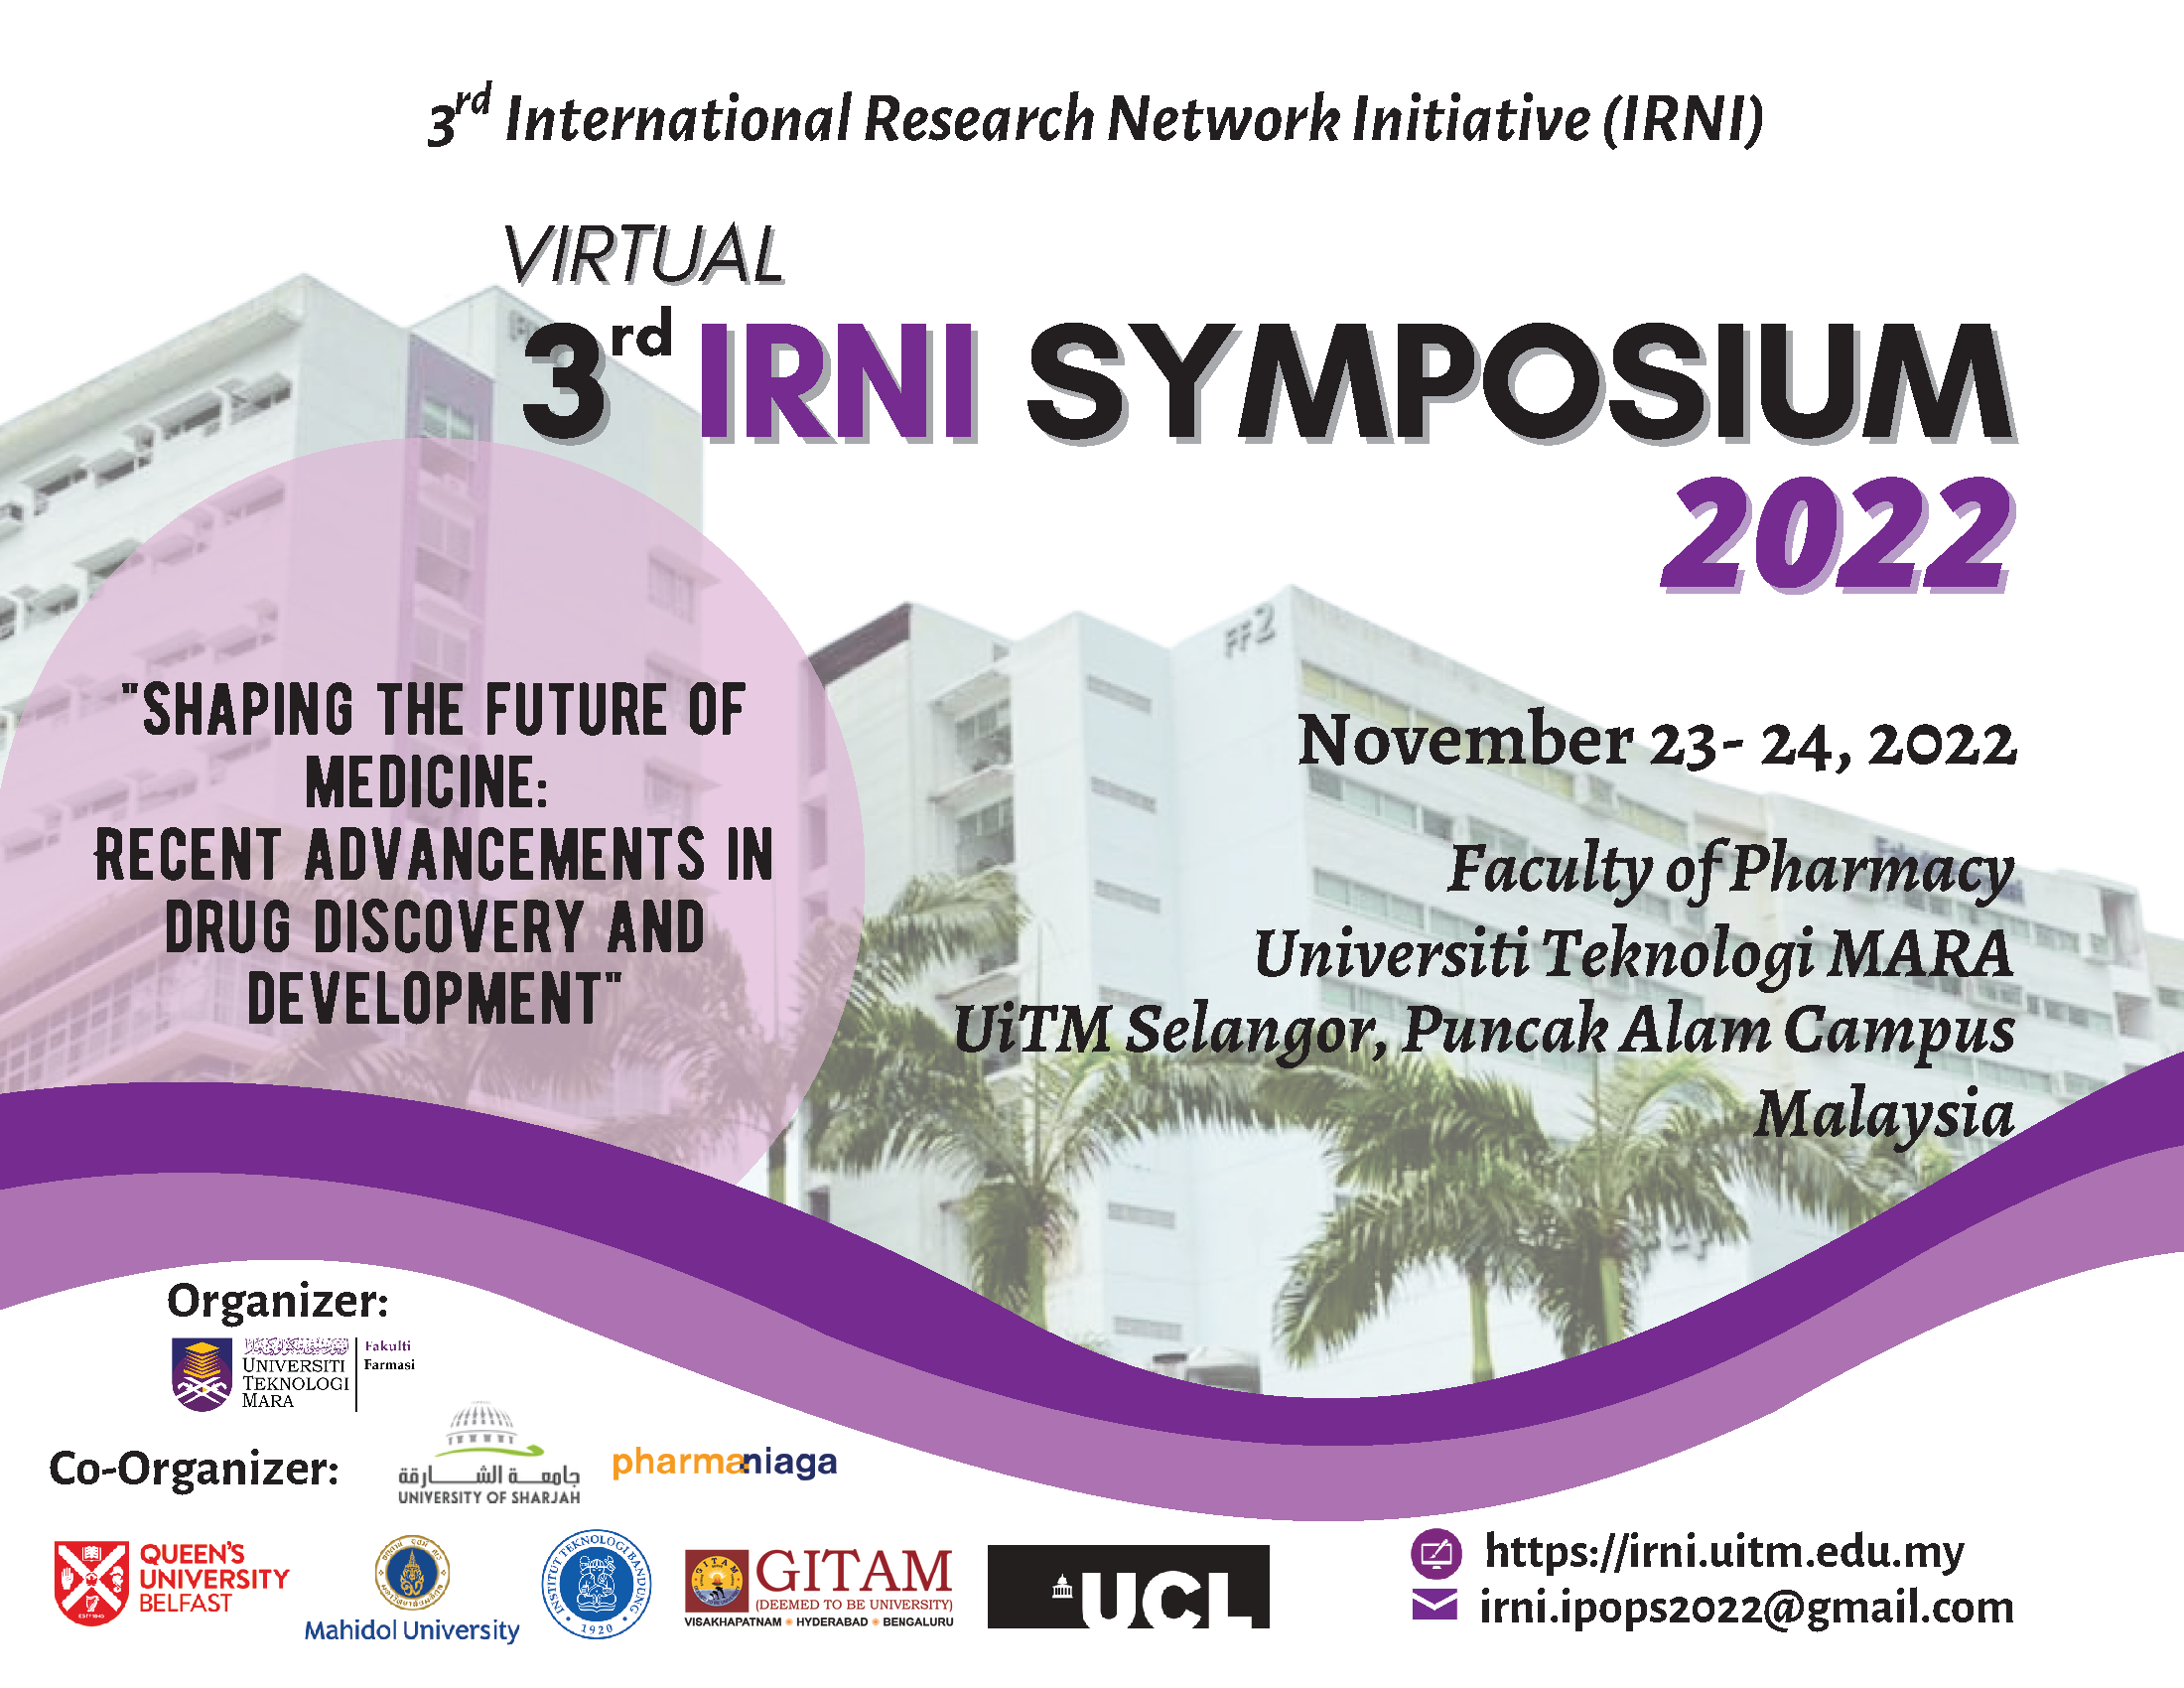 Virtual 3rd IRNI Symposium 2022: Exploring Recent Advancements in Drug Discovery and Development